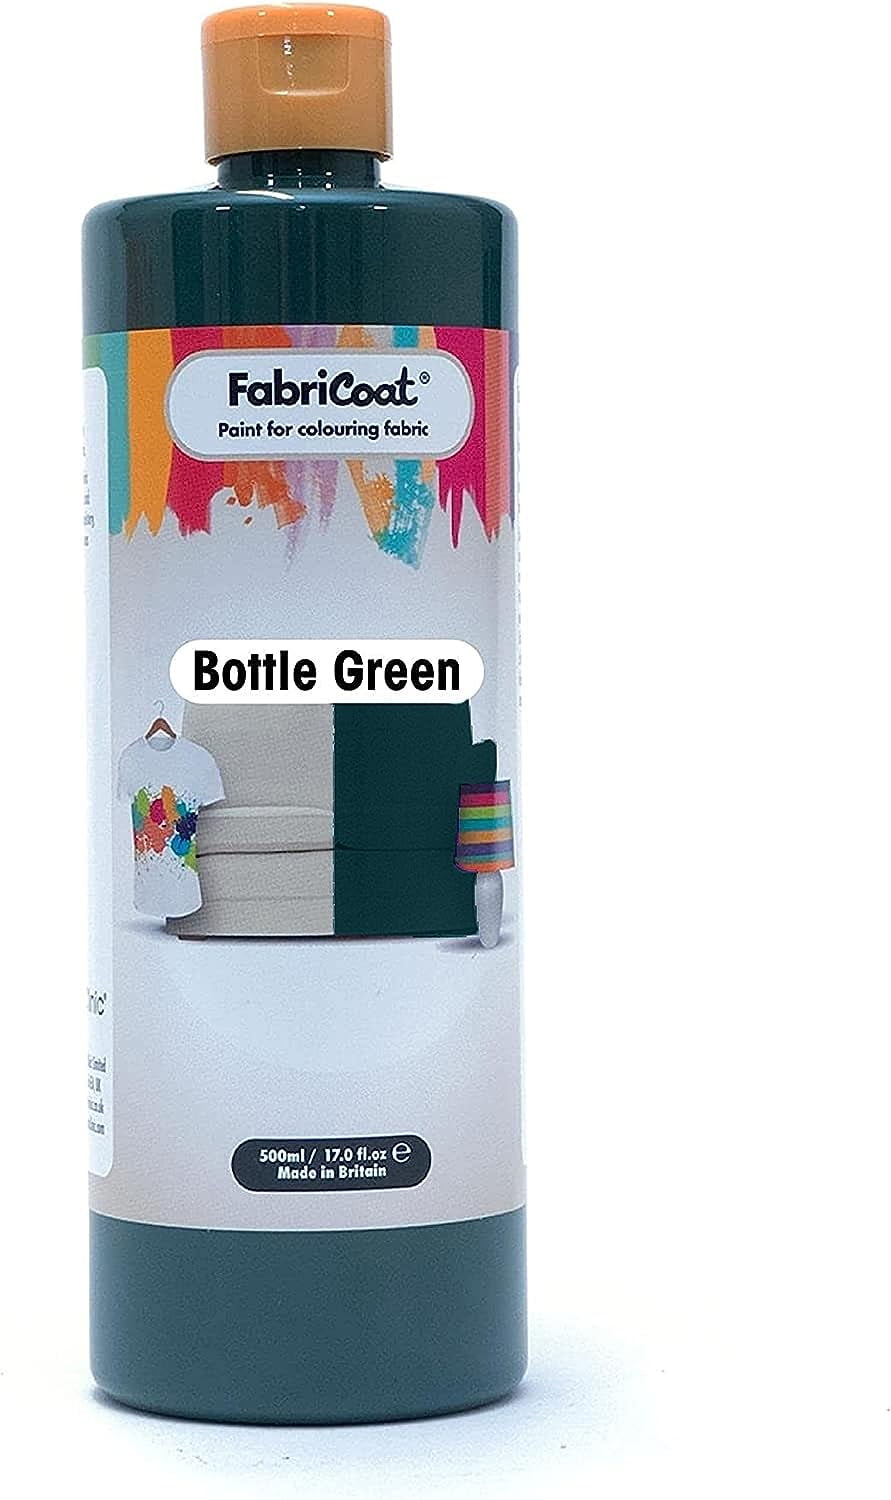 FabriCoat Dark Fabric Paint - Used for Restoring or Changing the Color of  Couches, Chairs, Upholstery, Soft Furnishings, Car Interiors, Clothing, &  Footwear (Size 8.5oz/ 250ml, Red Sole) 